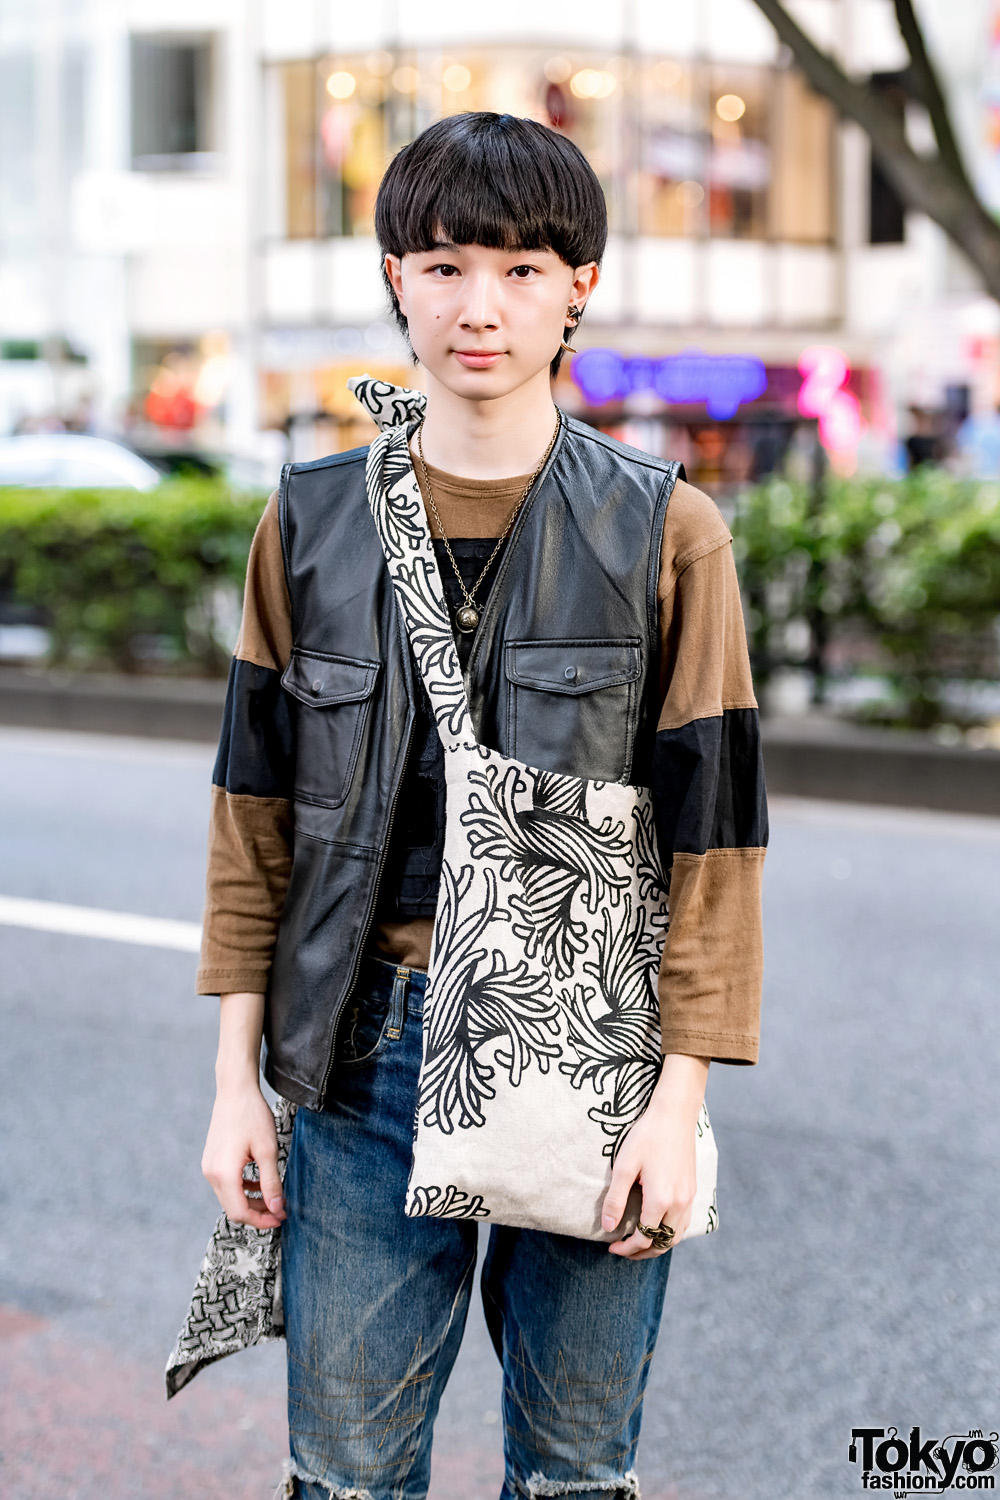 Christopher Nemeth Rope Print Fashion in Harajuku w/ Beret, Layered Tops,  Wide Leg Shorts & Leather Shoes